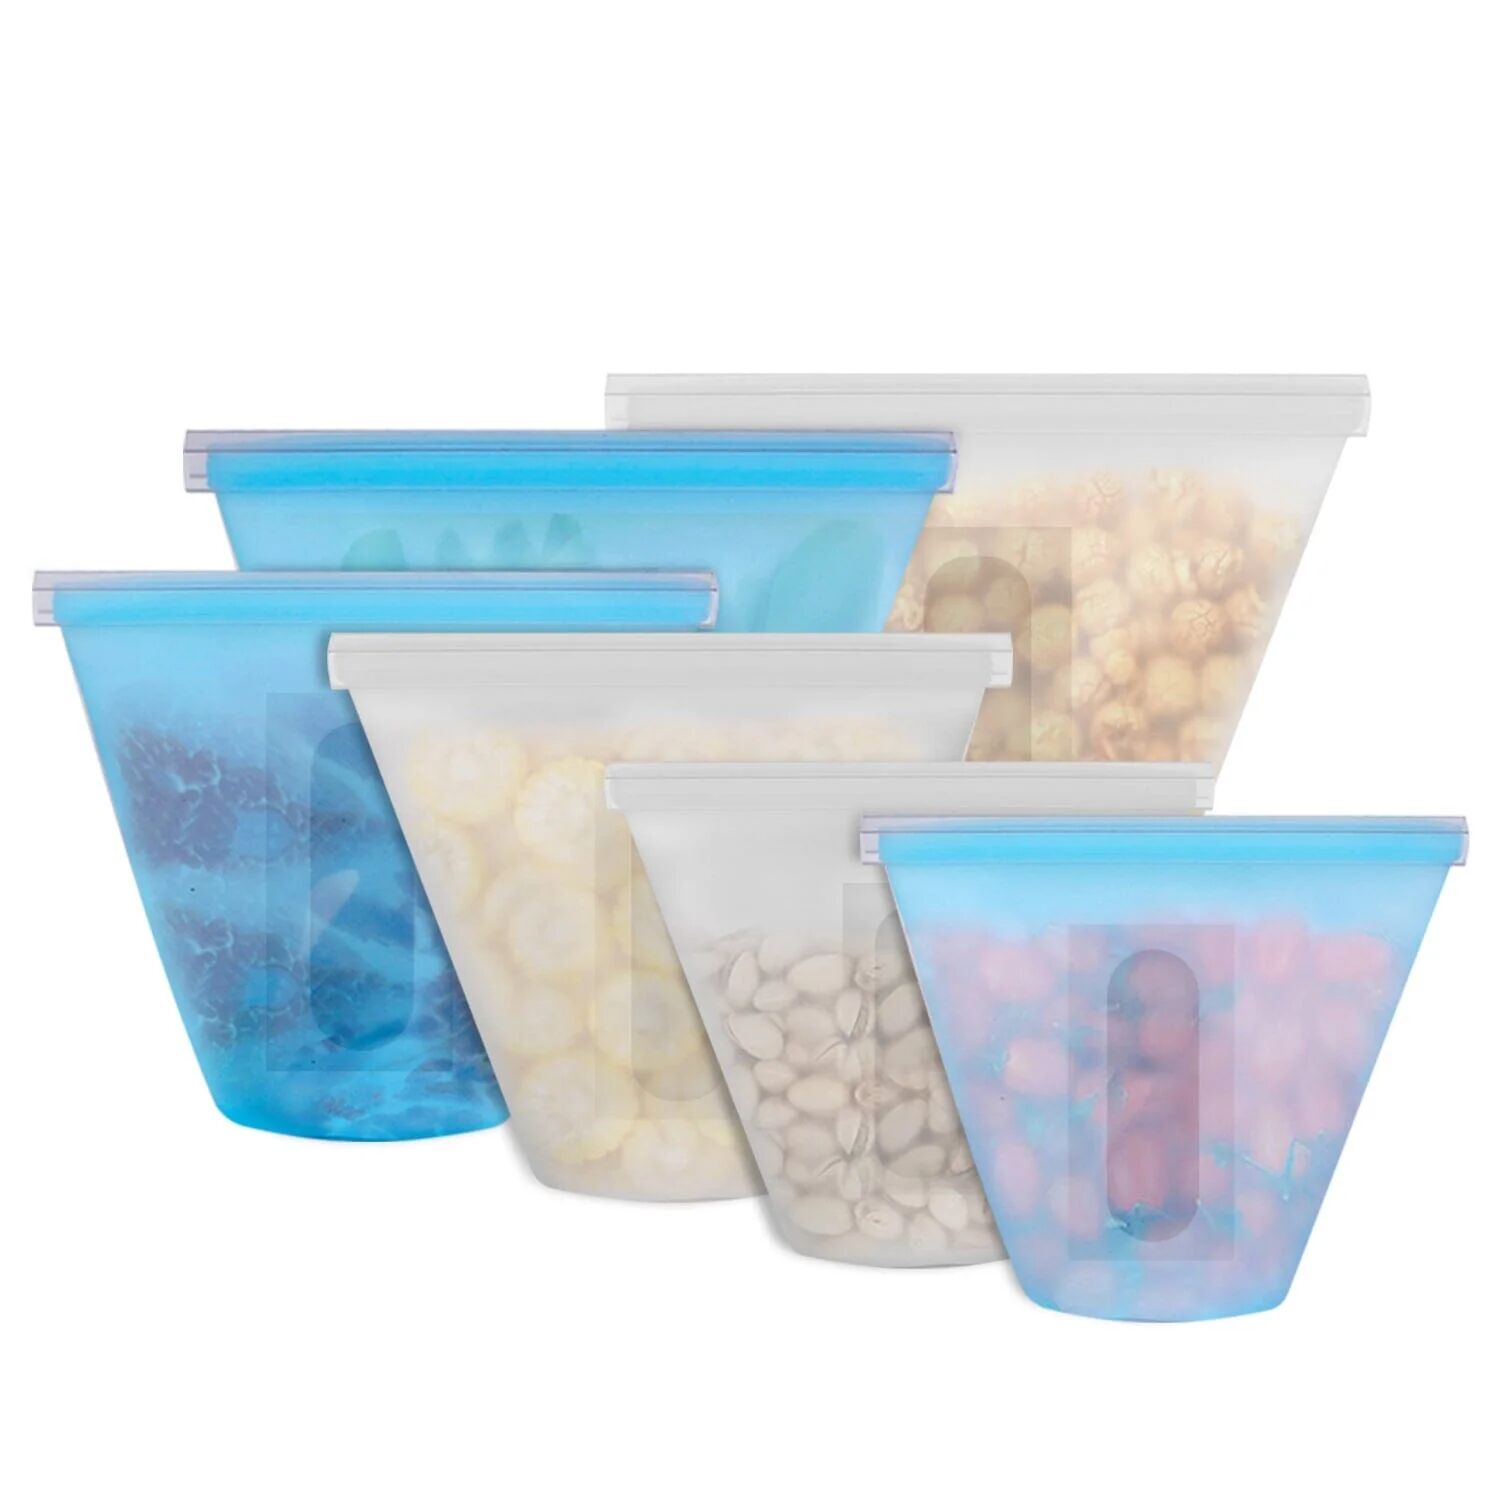 DailySale 3-Pieces: Silicone Food Storage Bags Reusable Leakproof Food Container Set with 3 Seals